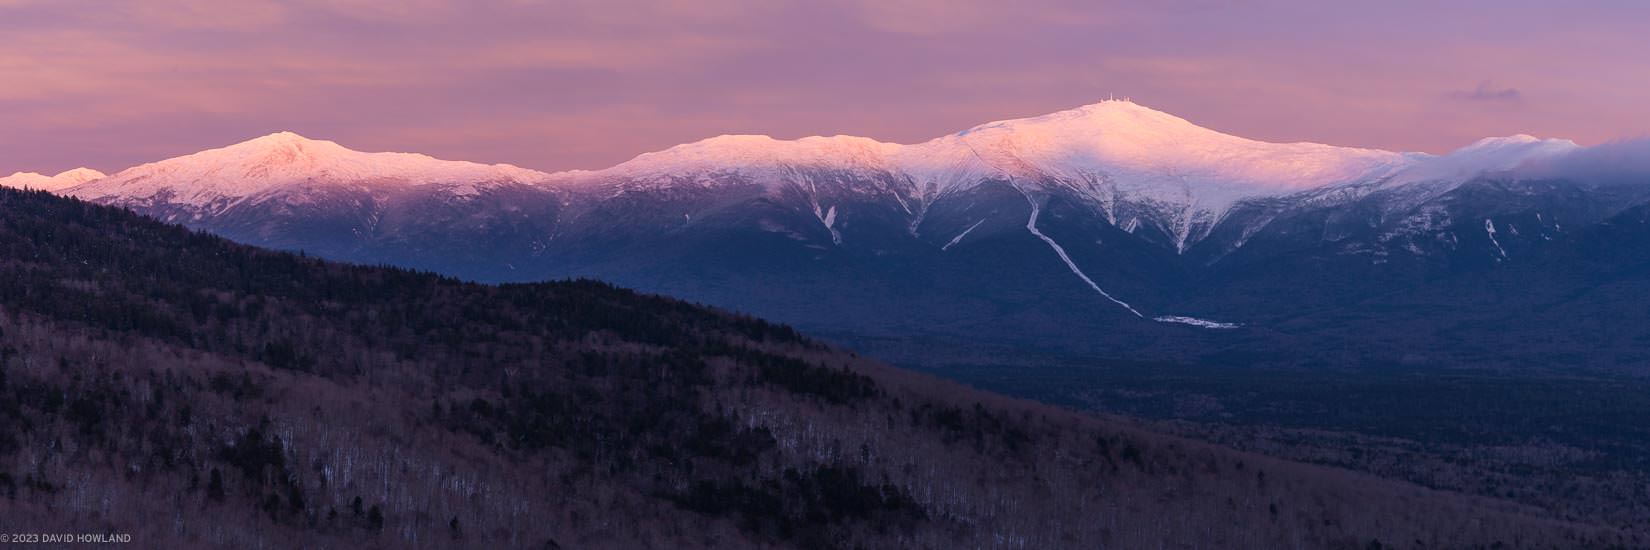 A panorama photo of sunset alpenglow lighting up Mount Monroe, Mount Washington, and Mount Jefferson in the Presidential Range of New Hampshire.